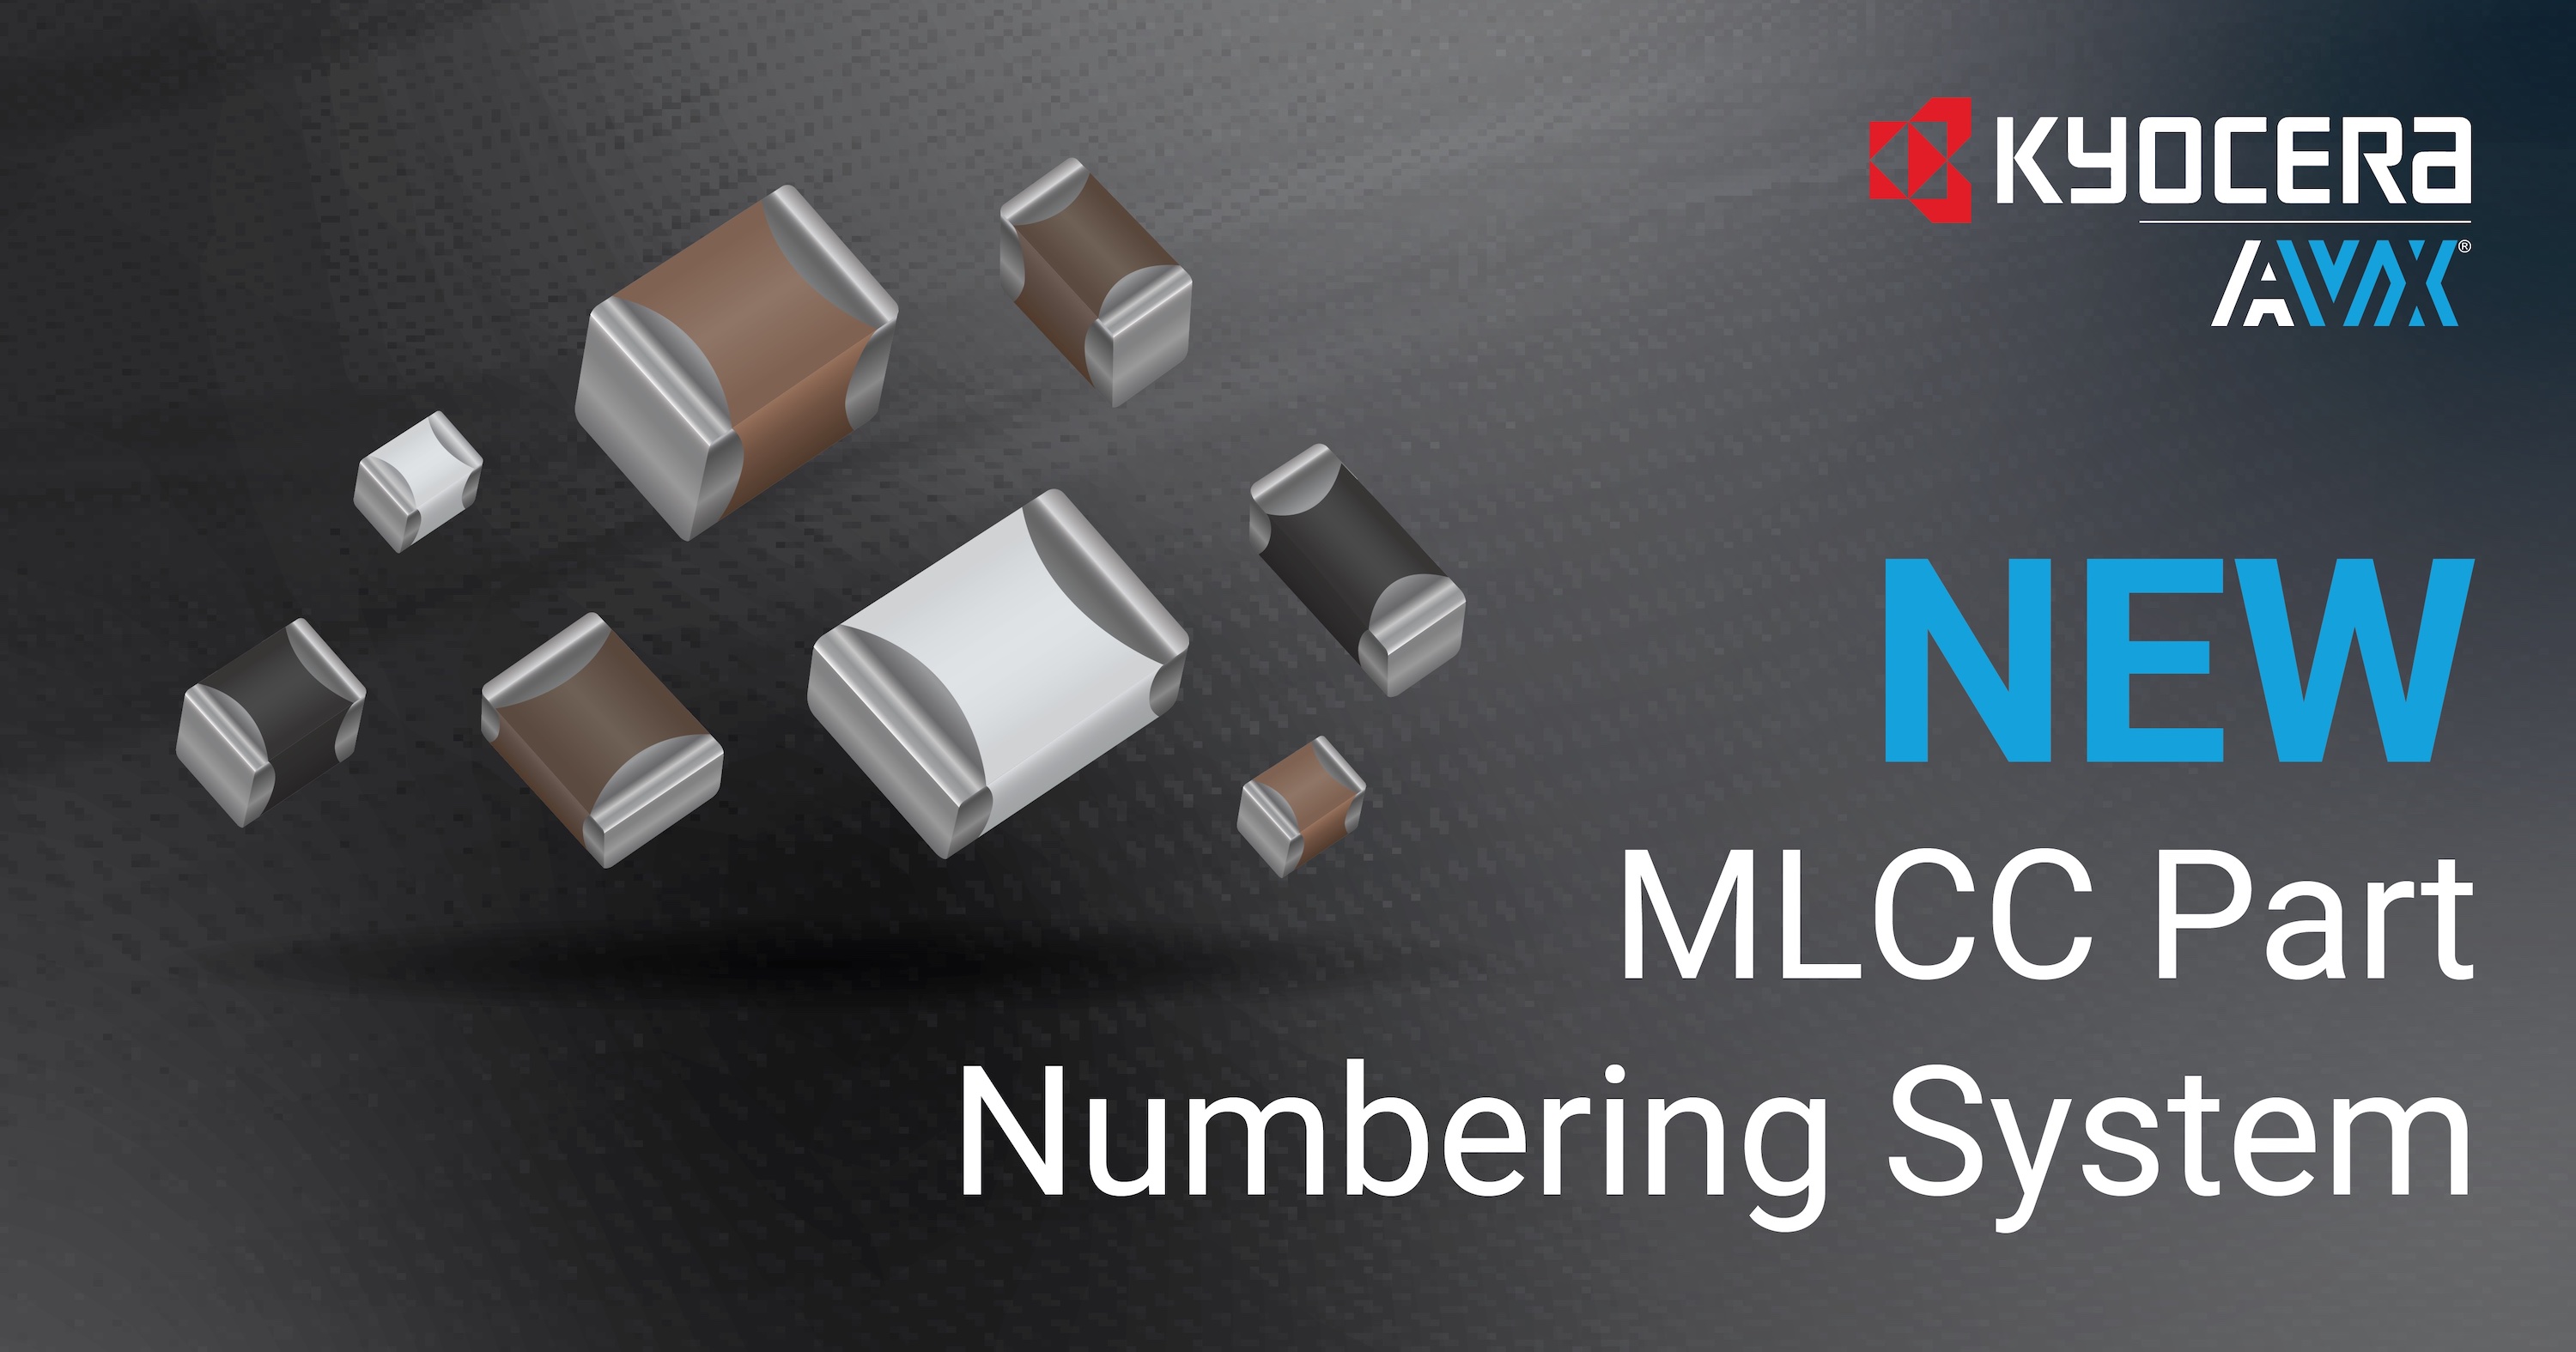 KYOCERA AVX ANNOUNCES NEW MLCC PART NUMBERING SYSTEM